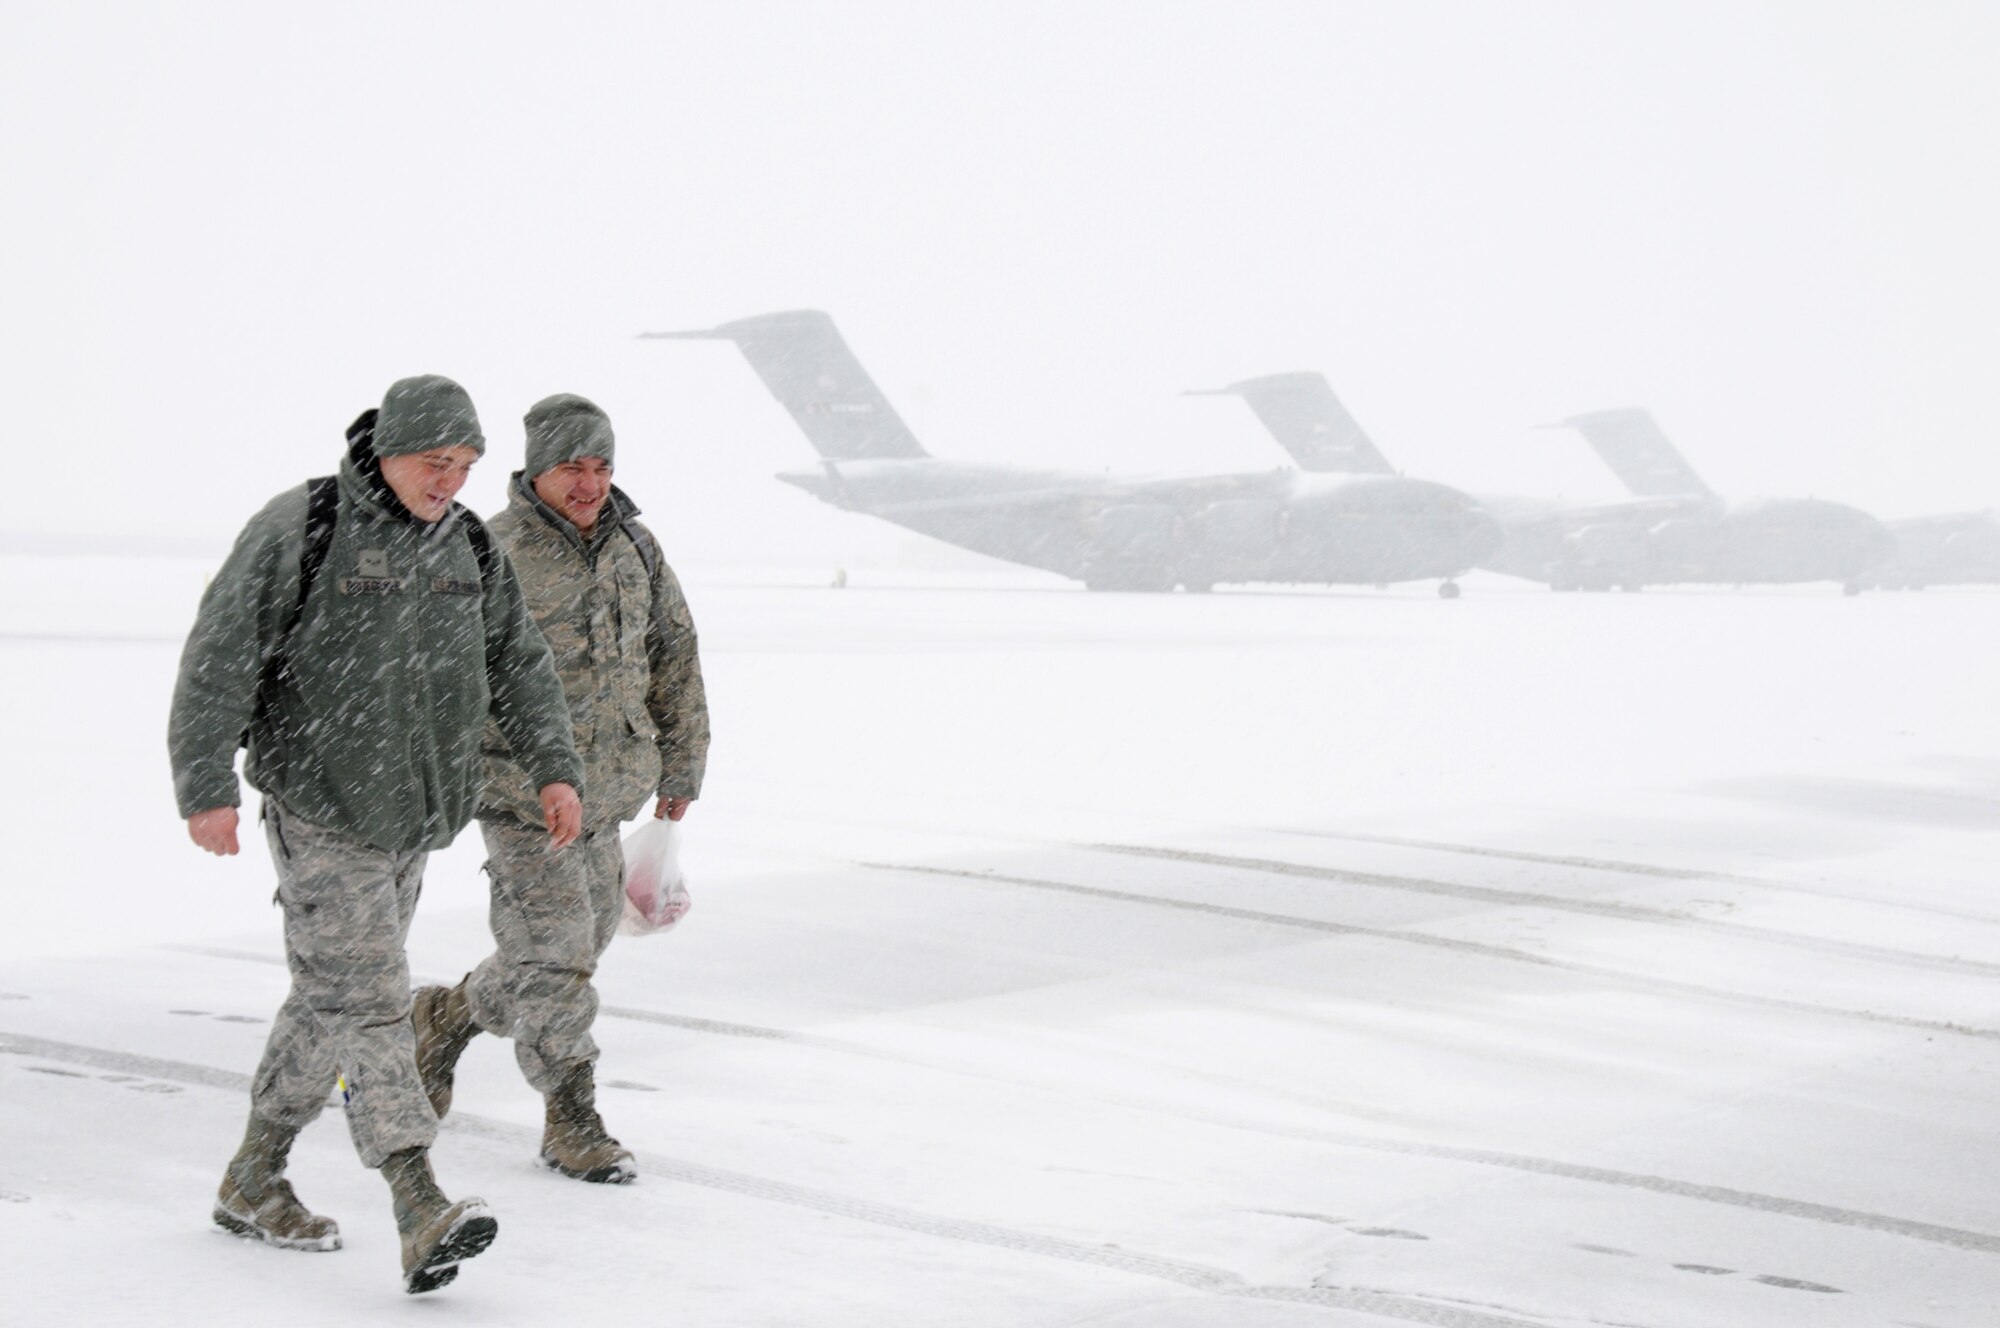 U.S. airmen with the 105th Airlift Wing, New York Air National Guard walk across the ramp at Stewart Air National Guard Base, N.Y., during a winter storm. (U.S. Air Force photo by Tech. Sgt. Michael O'Halloran/Released)


